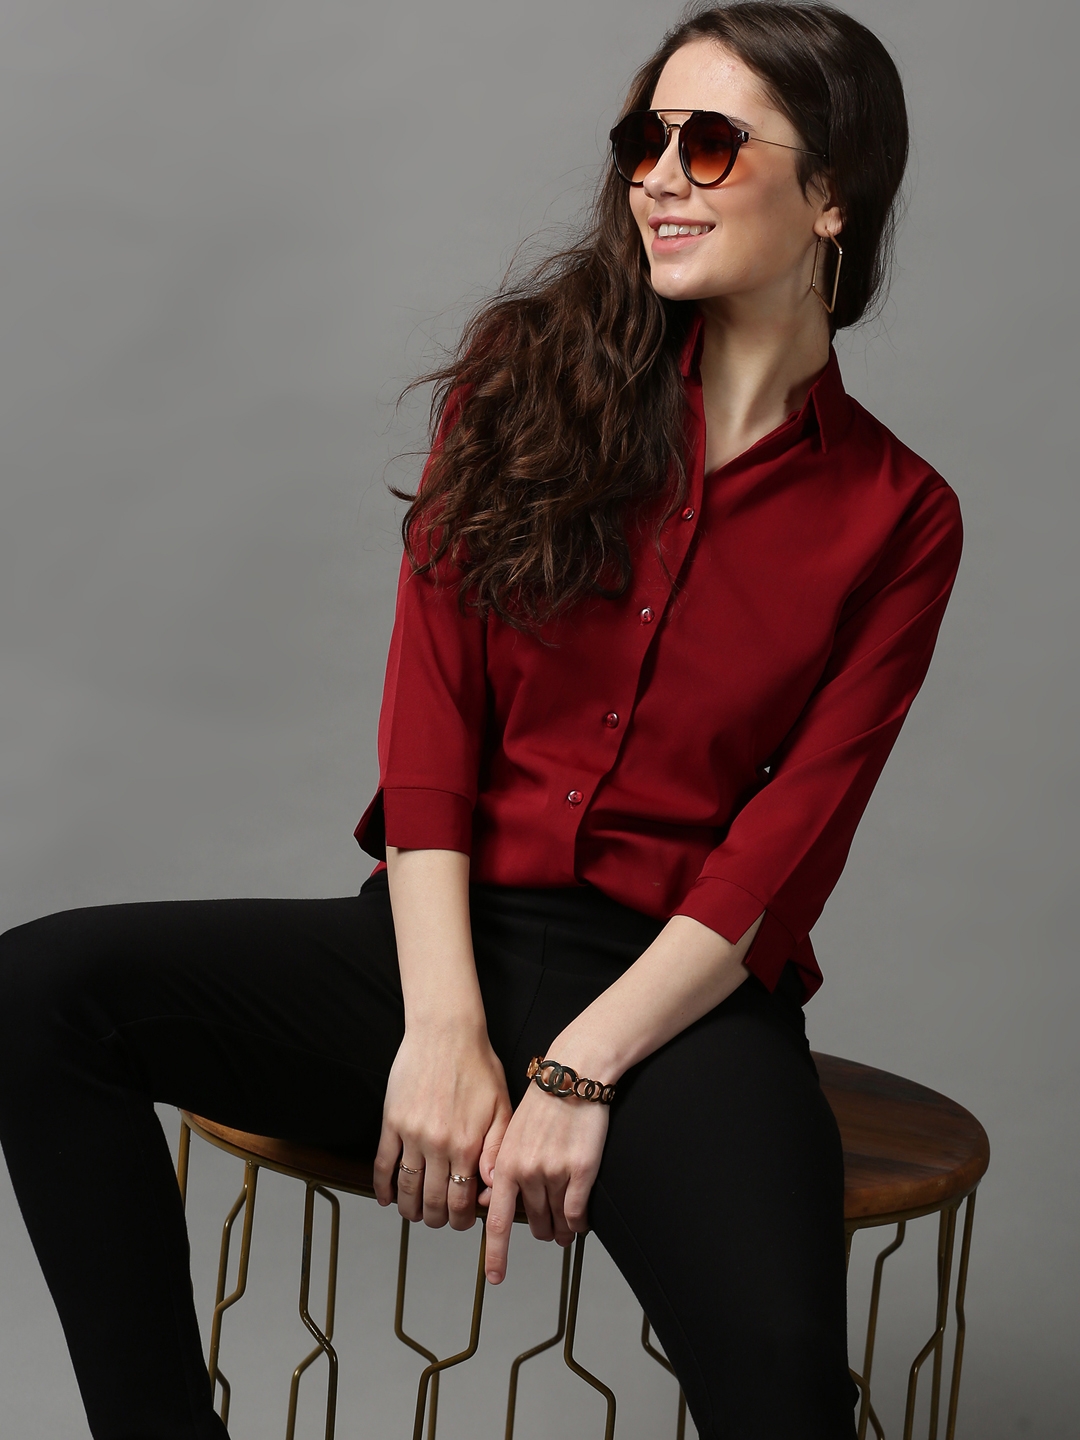 Showoff | SHOWOFF Women's Spread Collar Solid Maroon Polyester Shirt